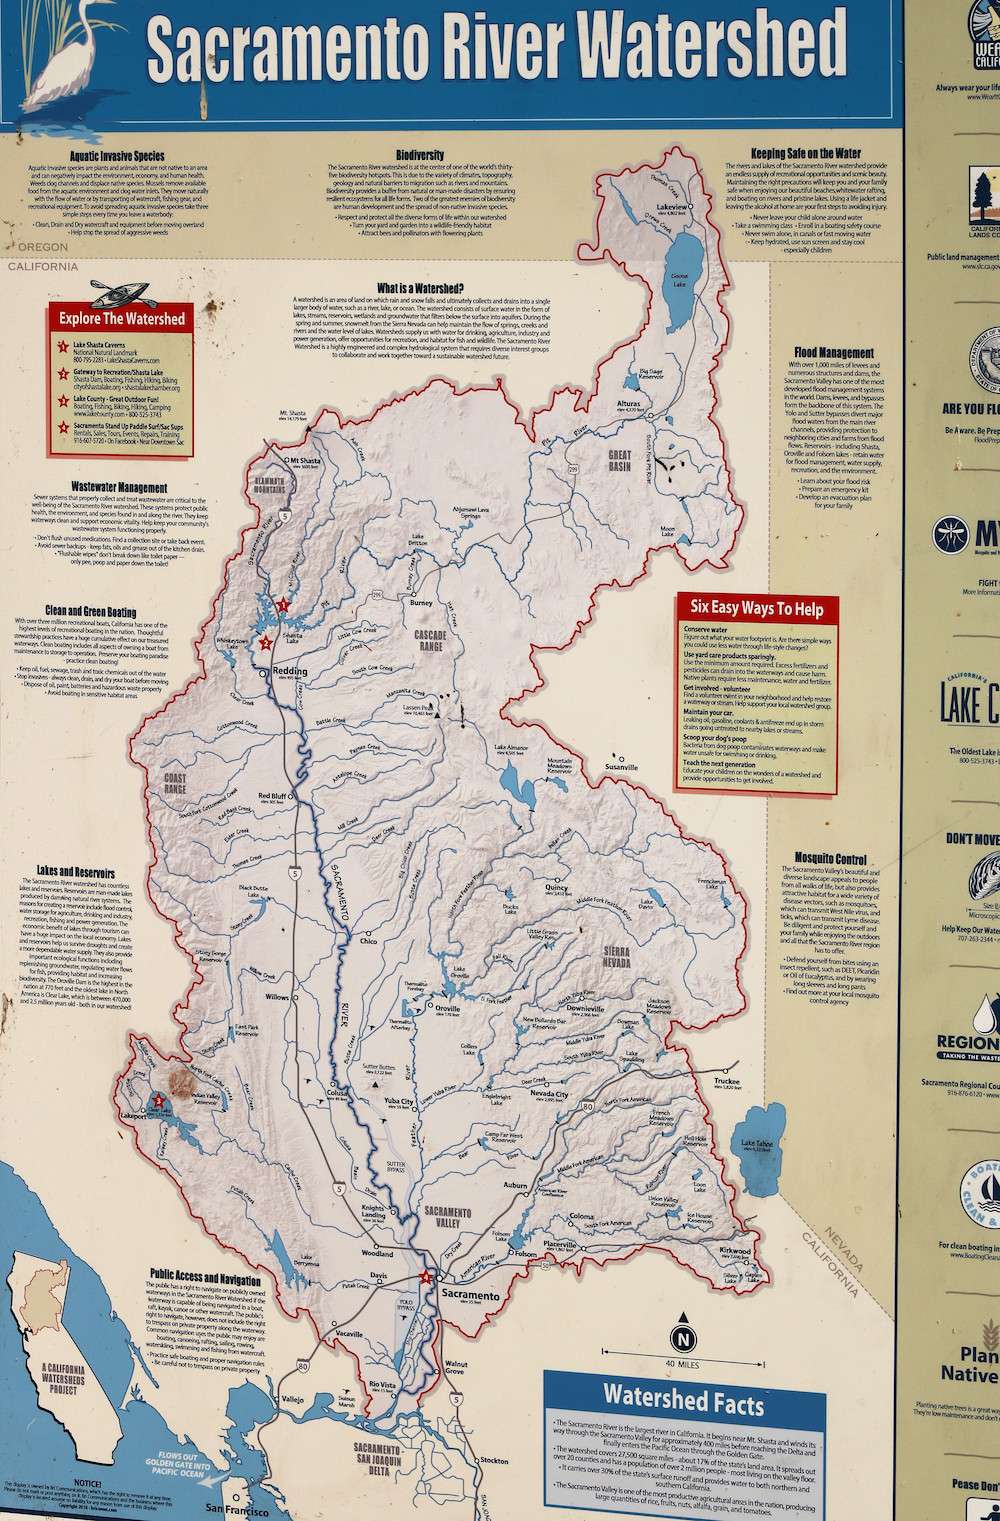 The Sacramento River Watershed.